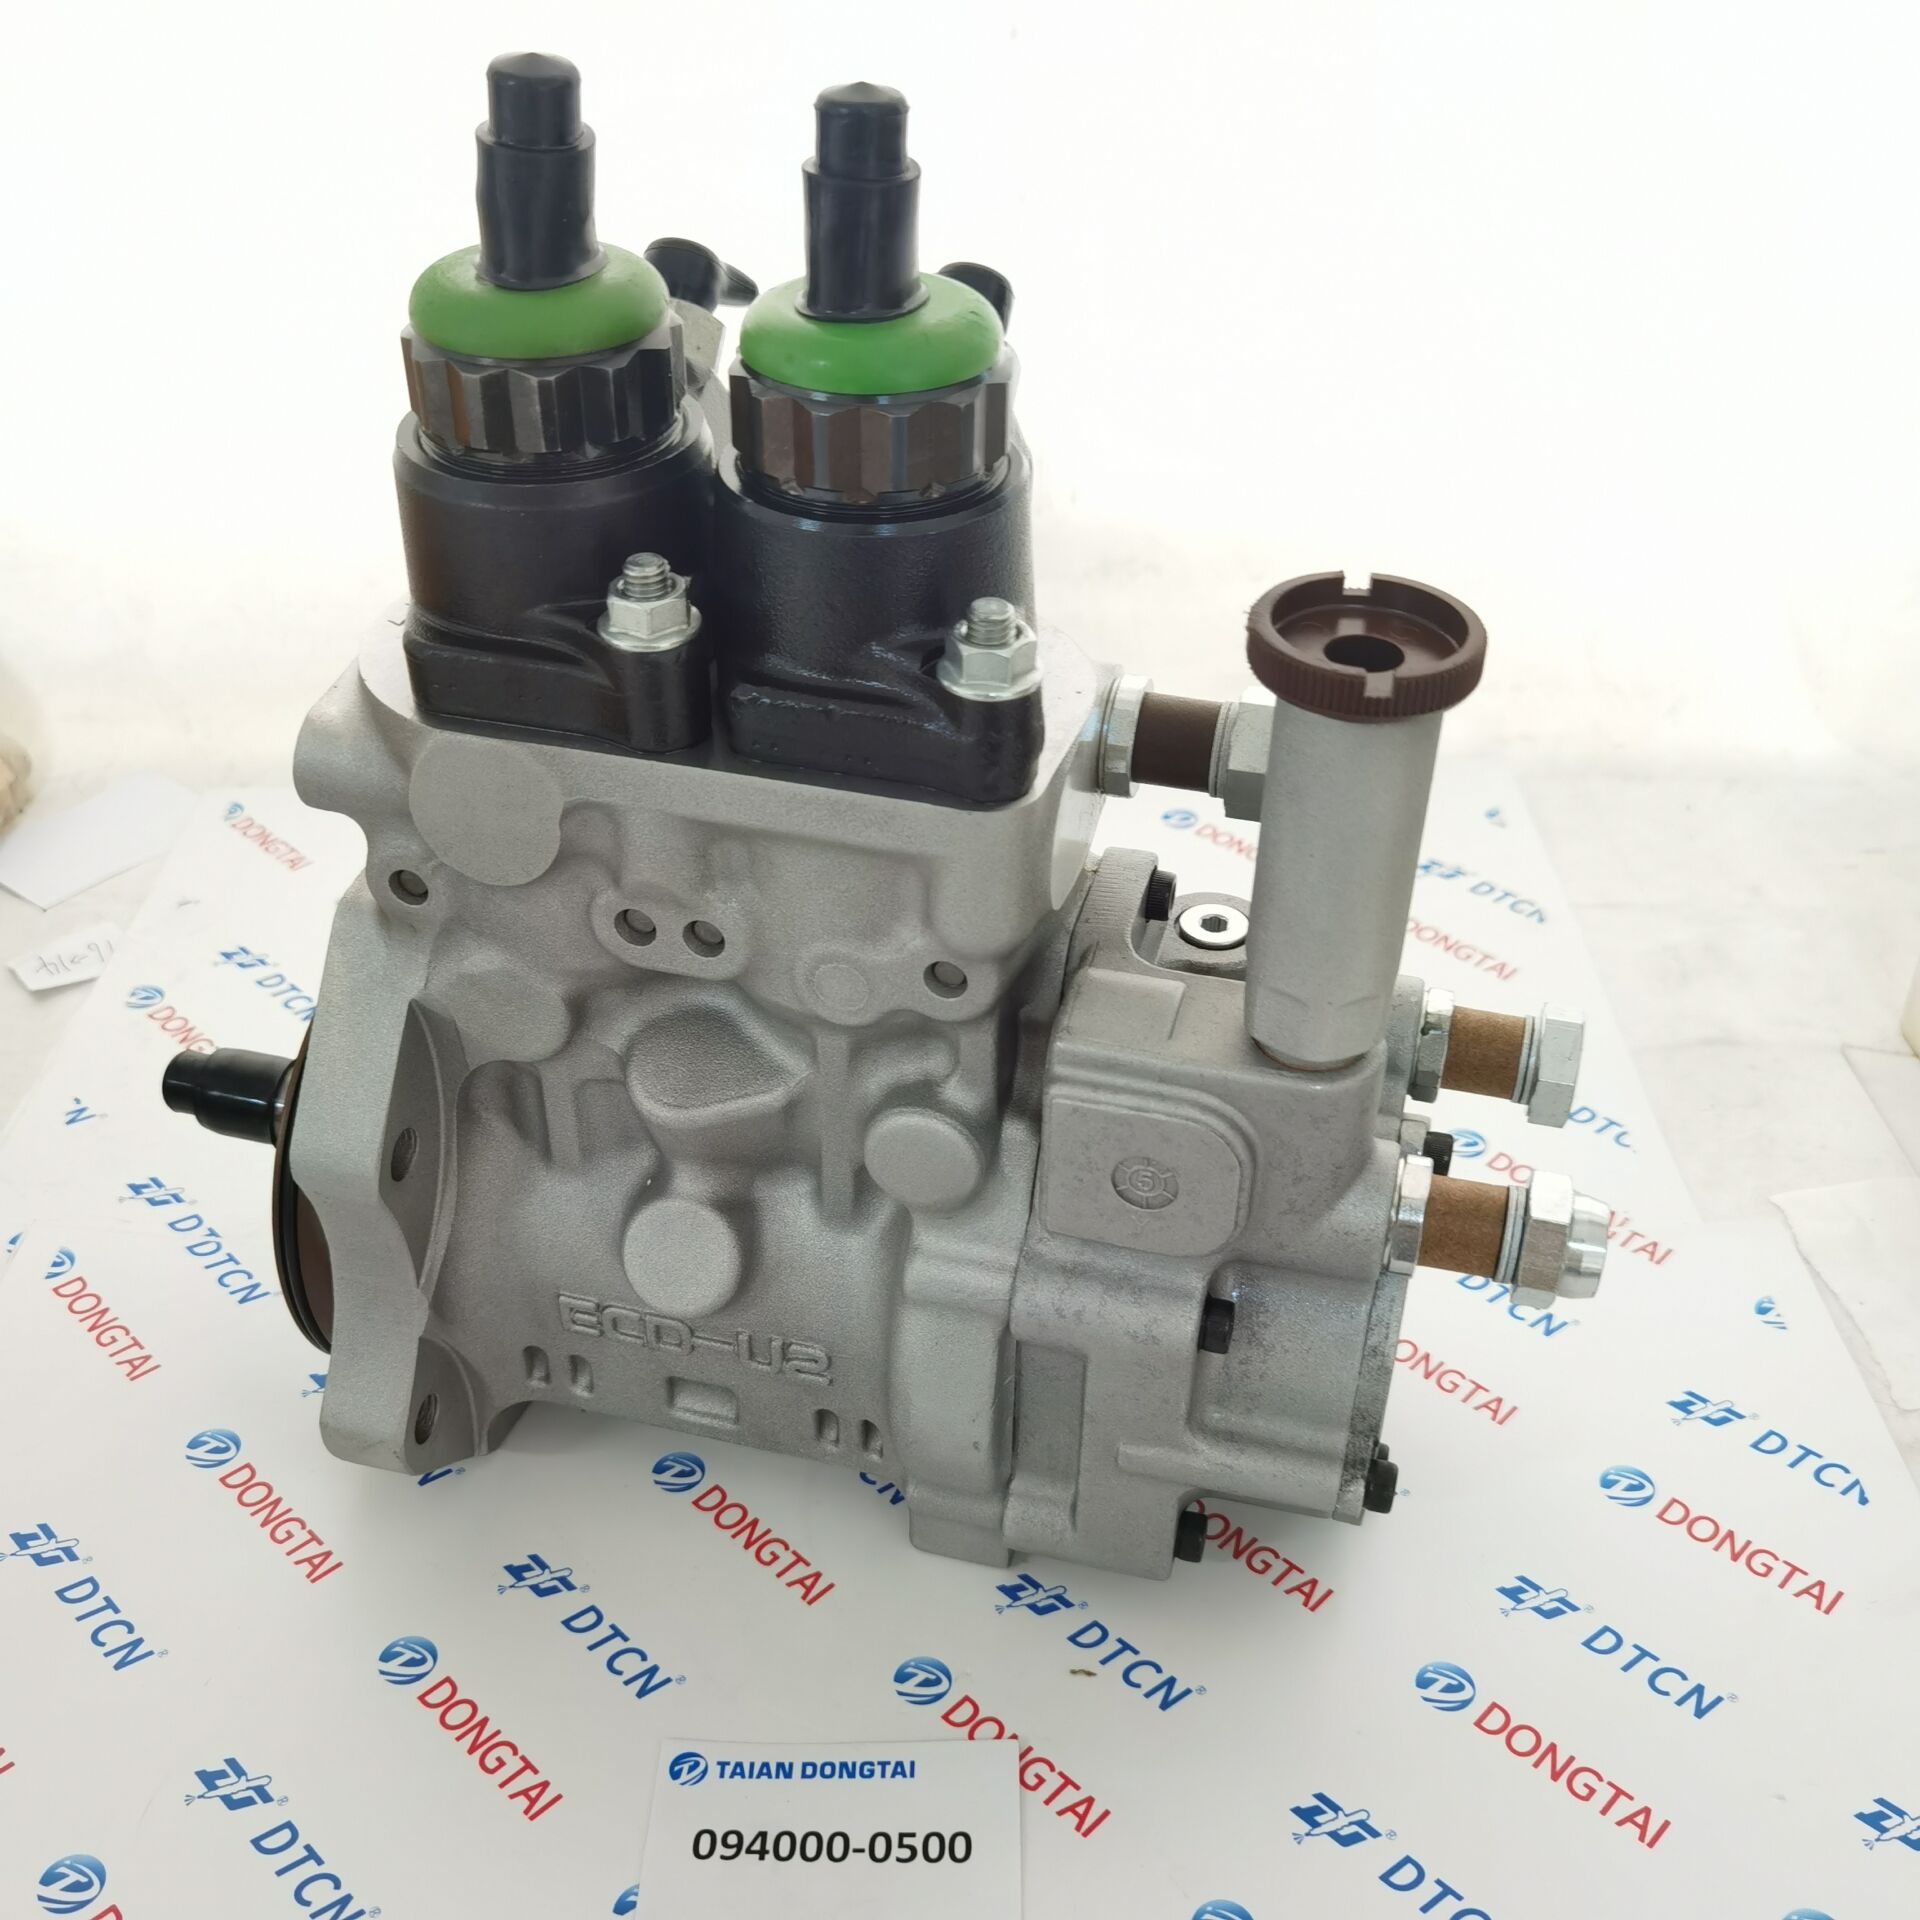 Cheap PriceList for Mud Pump Spare Parts Valves - DENSO Fuel Injection Pump 094000-0500 (RE521423, SE501921) For john Deere – Dongtai